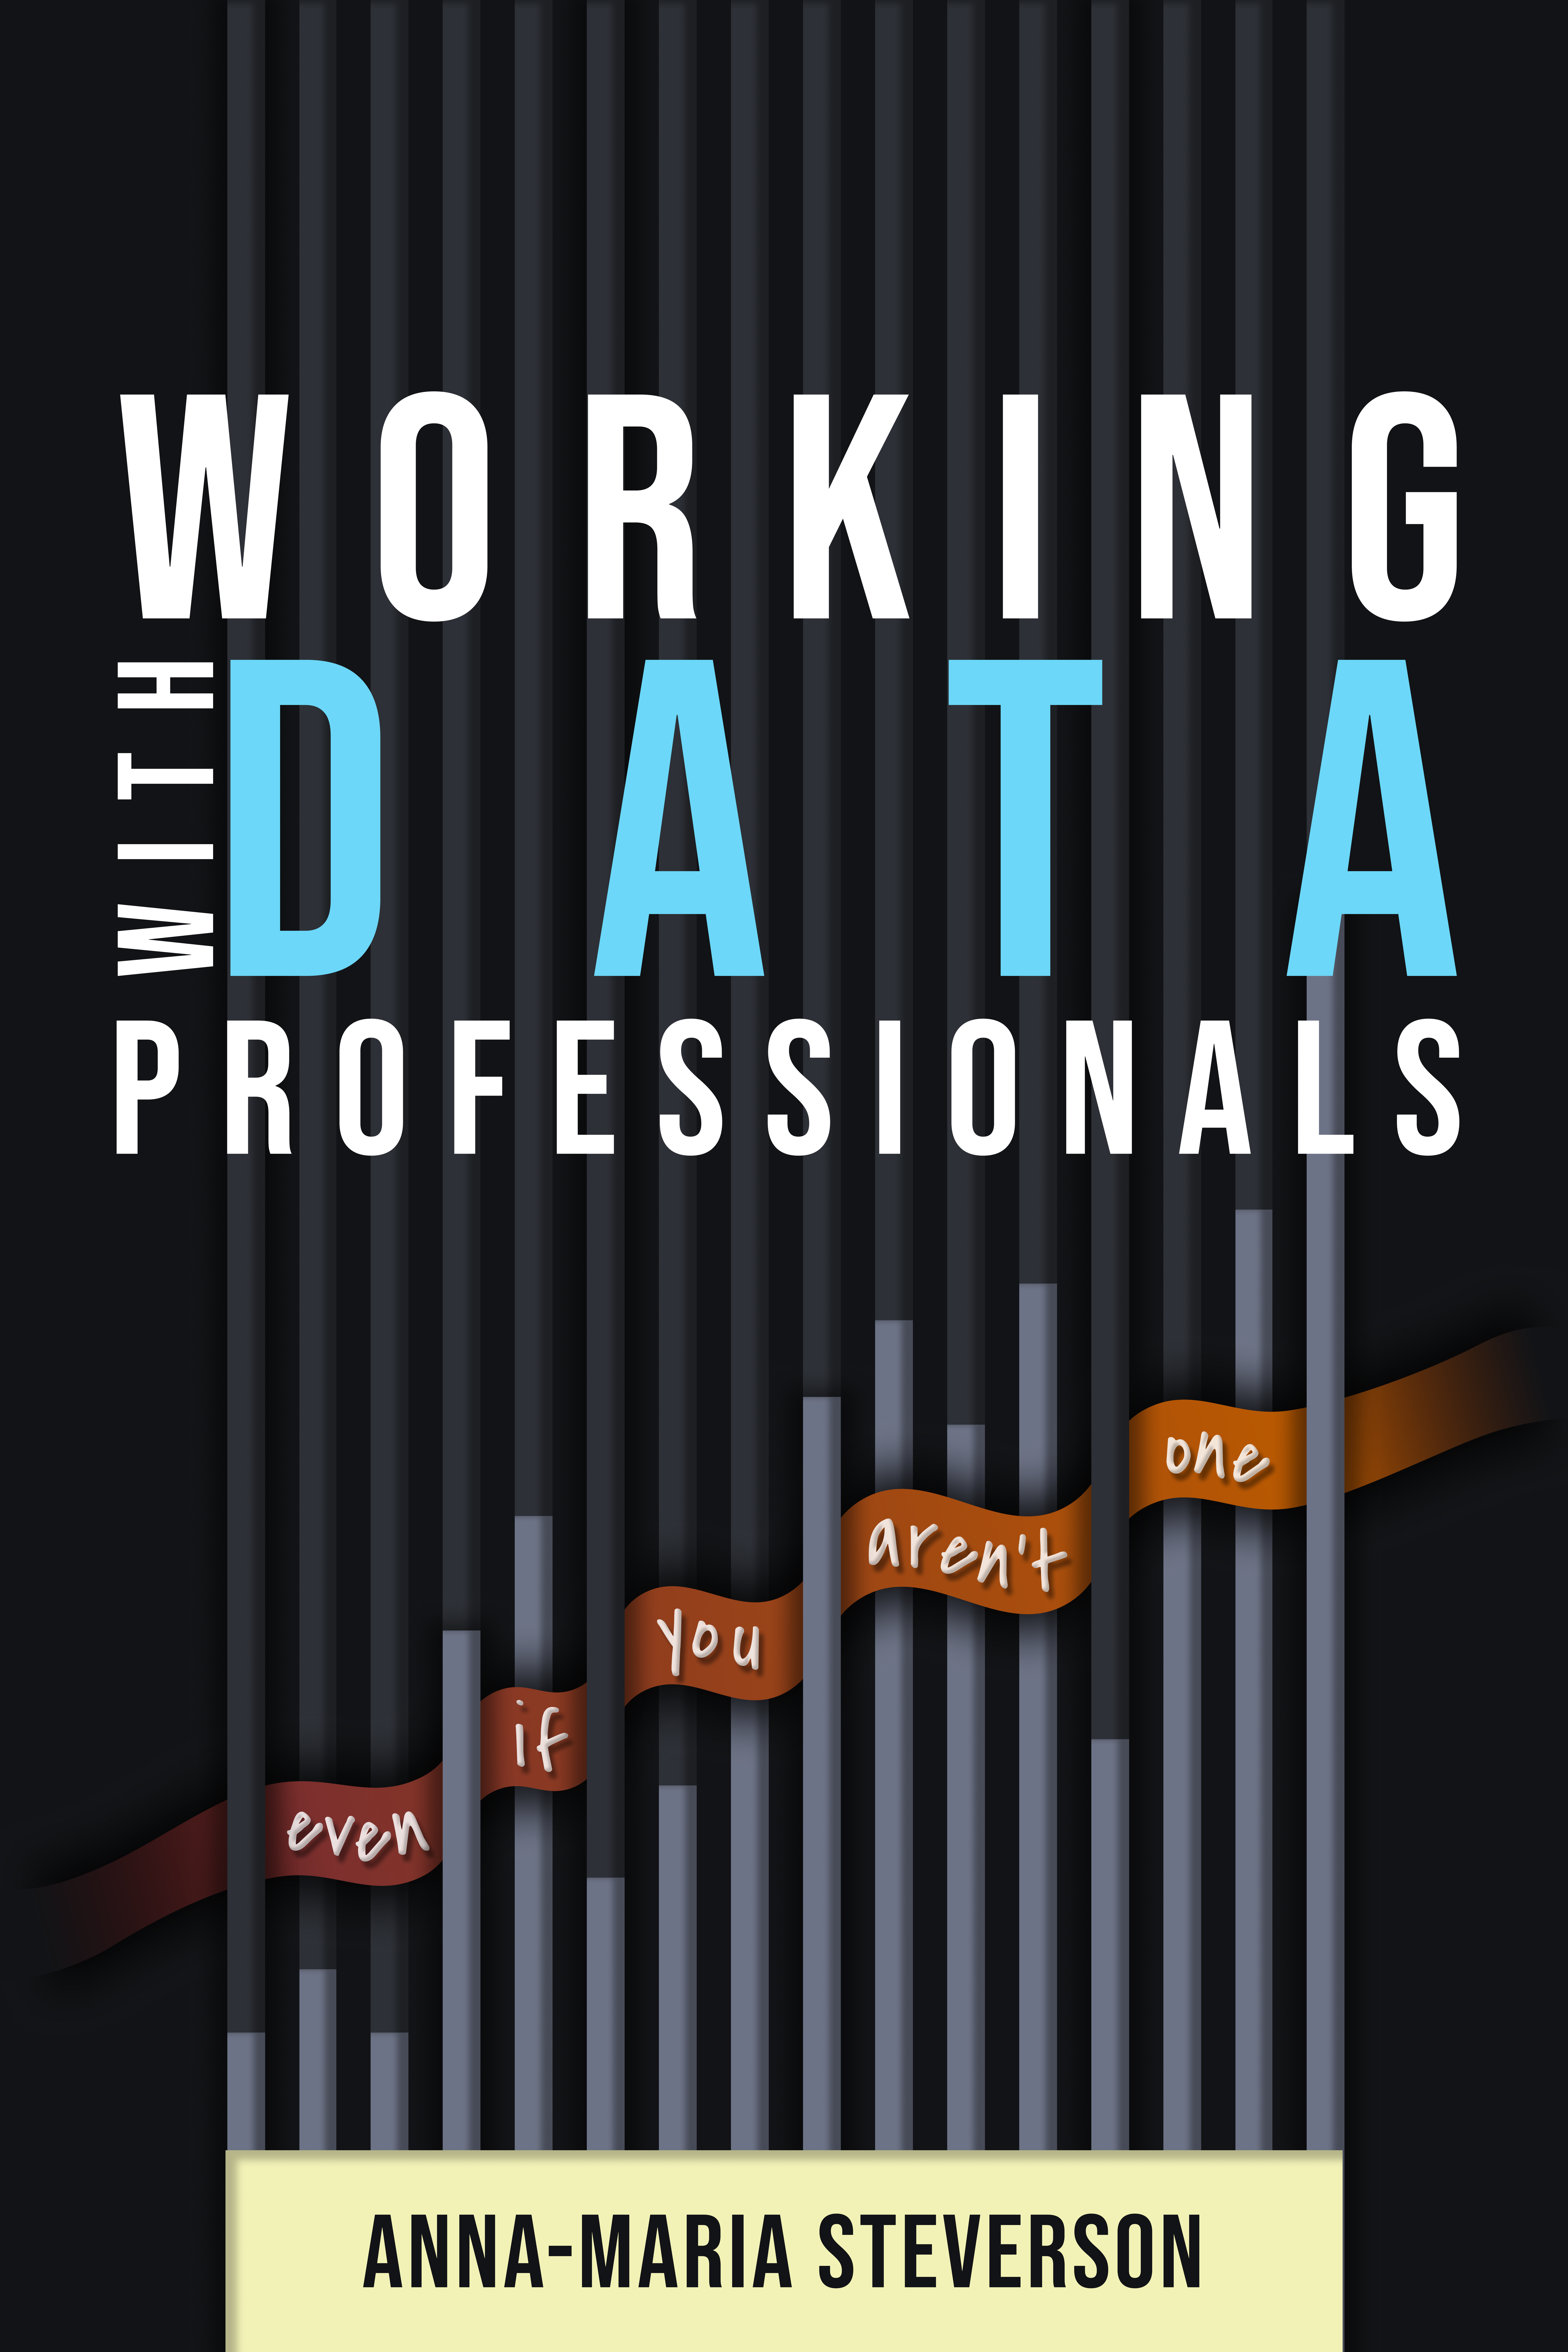 Book cover for working with data professionals (even if you aren't one!) by anna-maria steverson